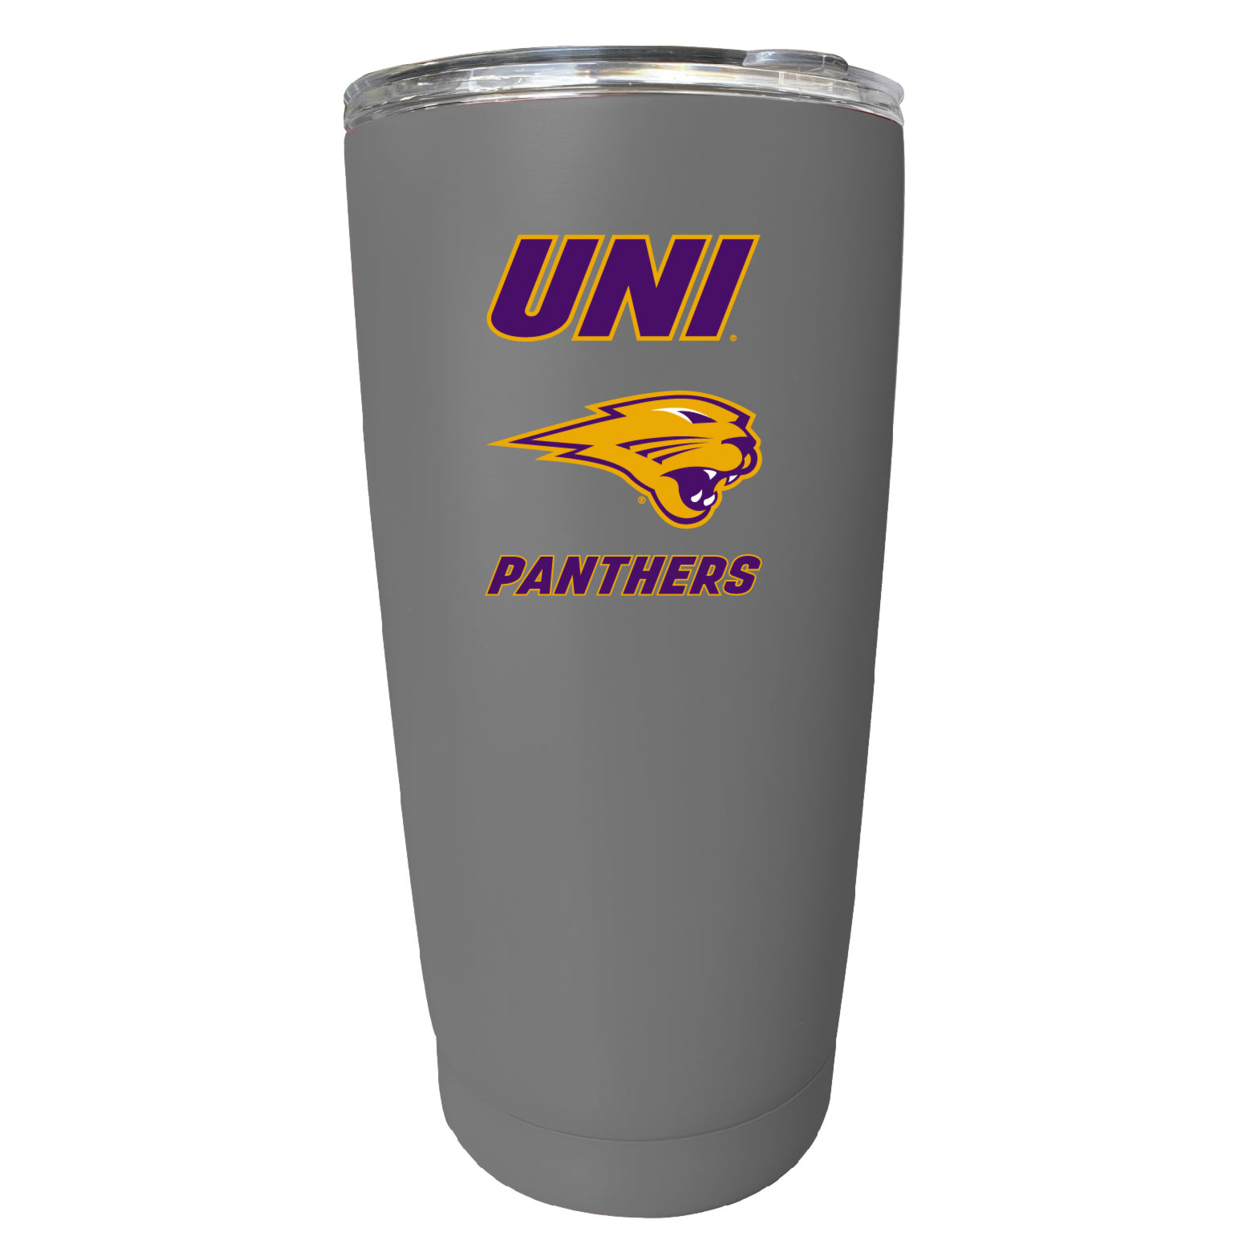 Northern Iowa Panthers 16 Oz Stainless Steel Insulated Tumbler - Gray